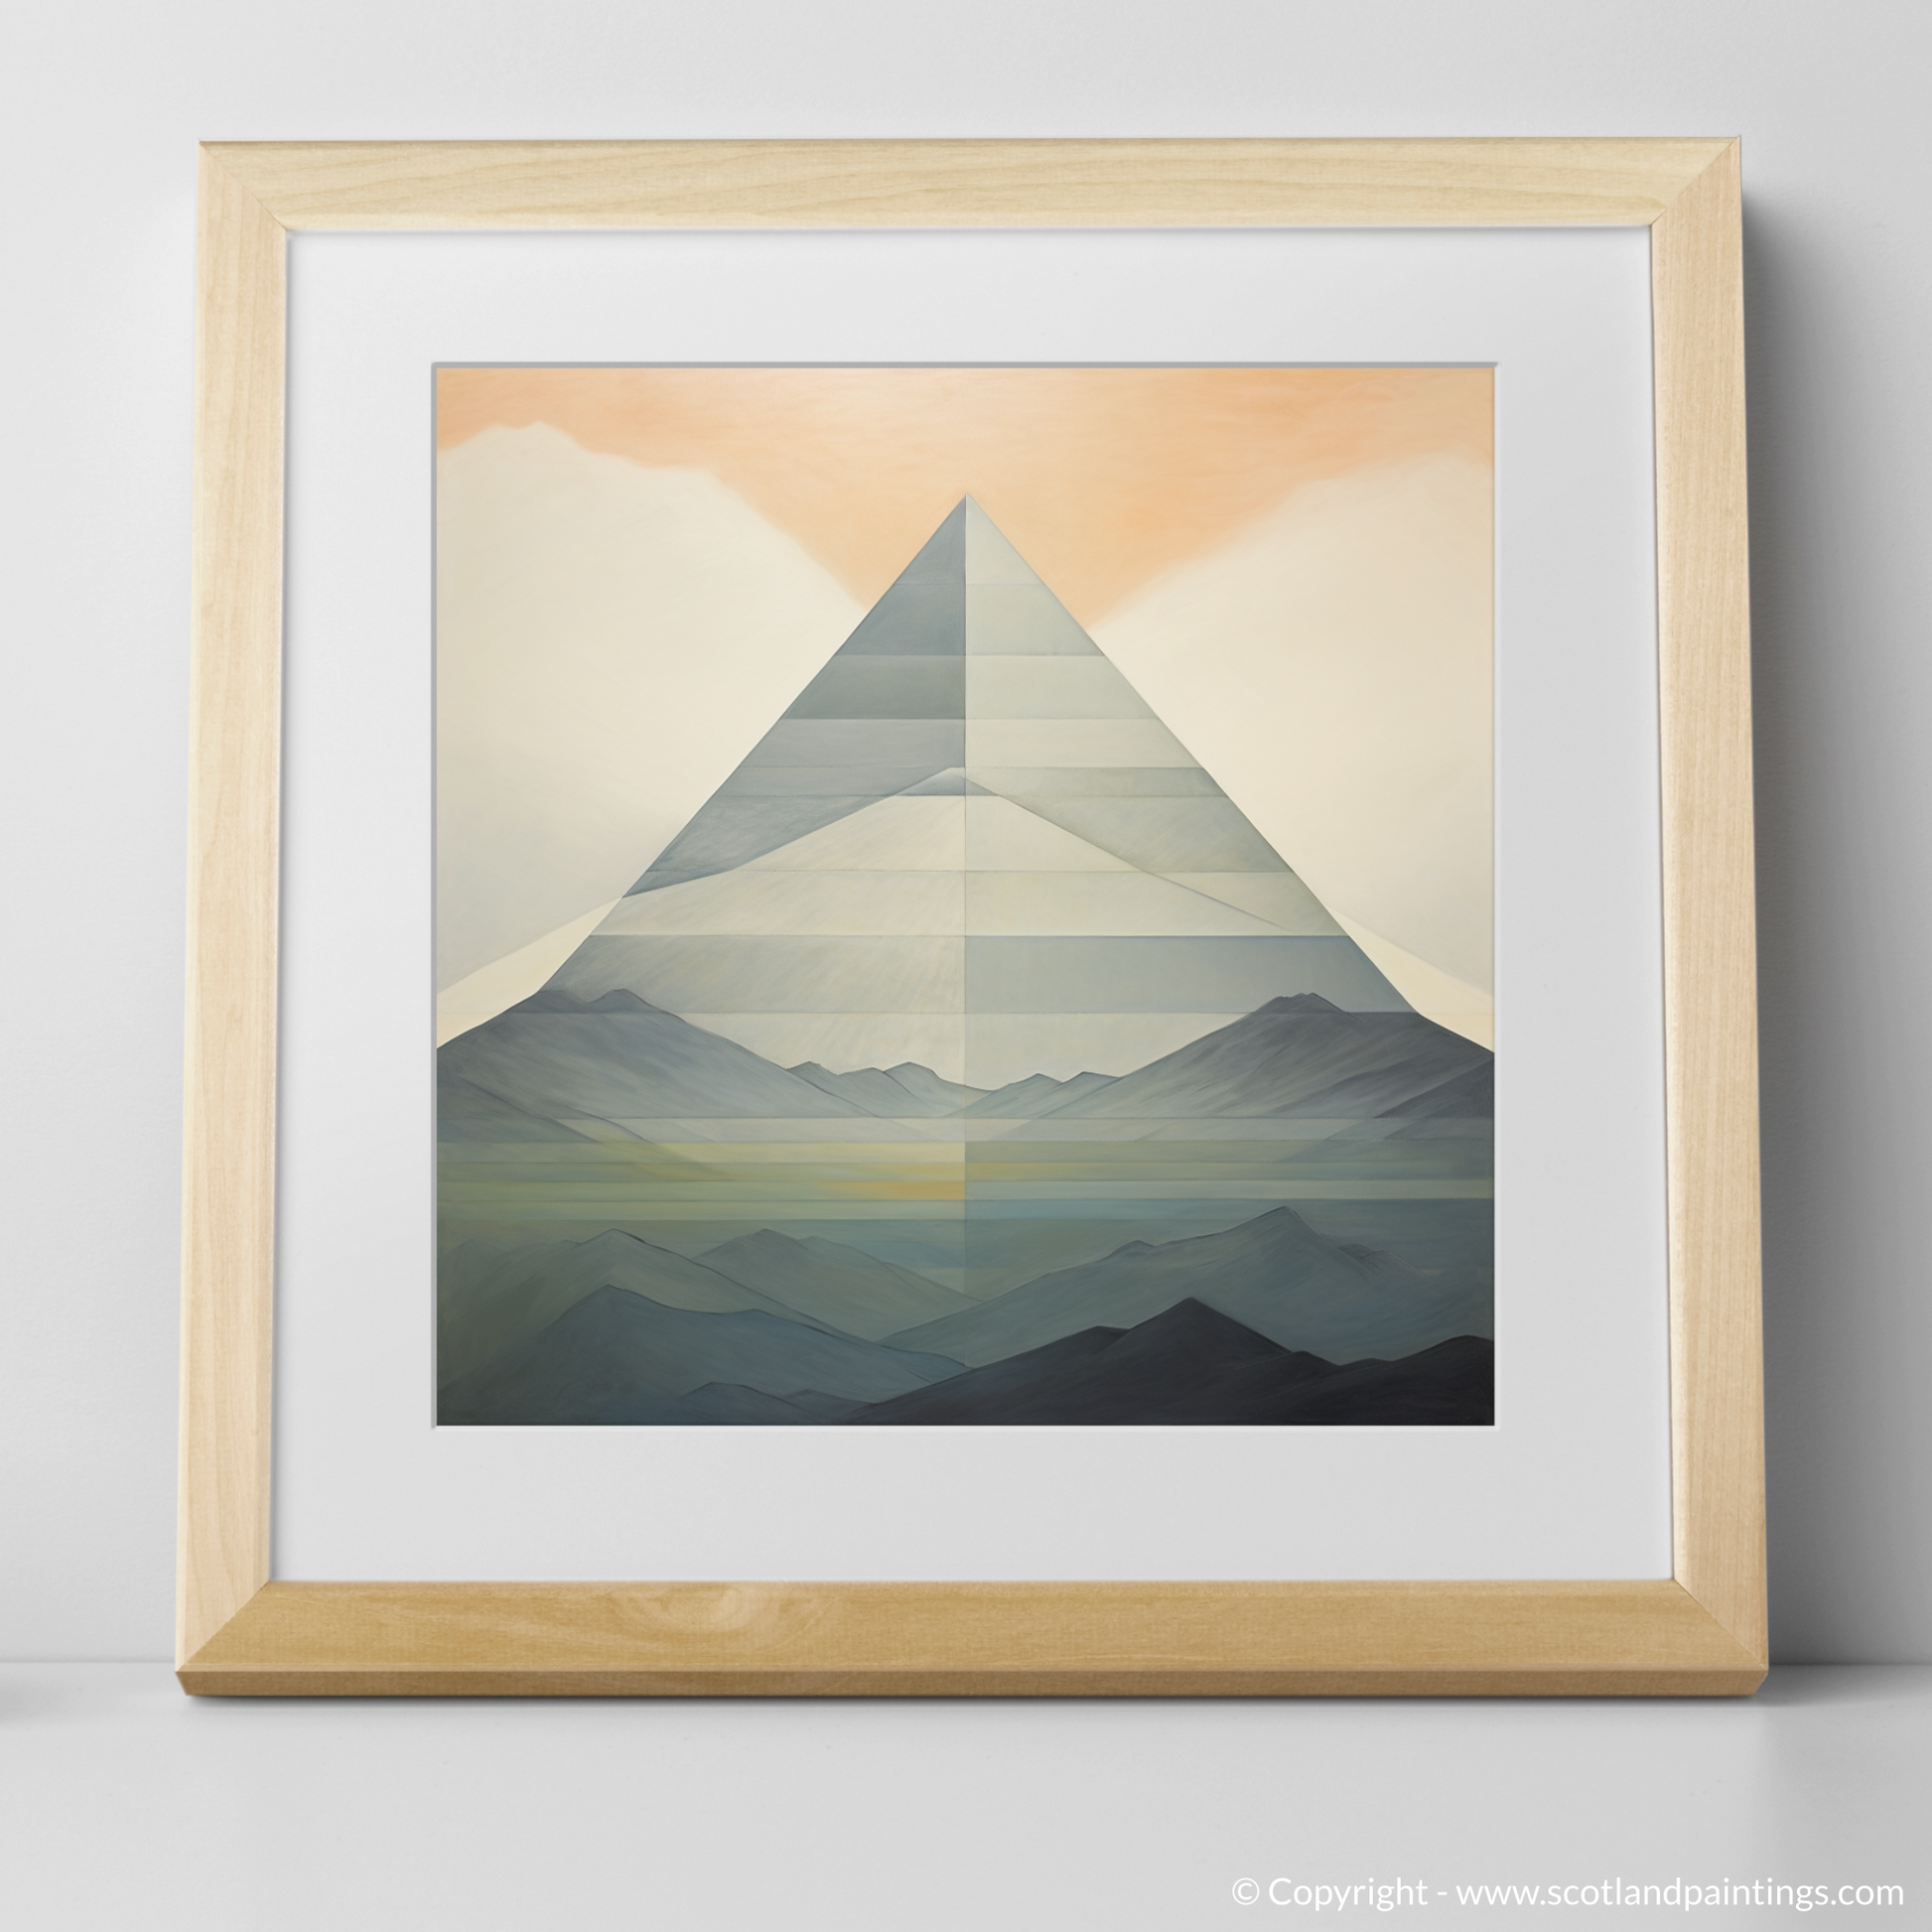 Art Print of Creag Mhòr (Meall na Aighean) with a natural frame